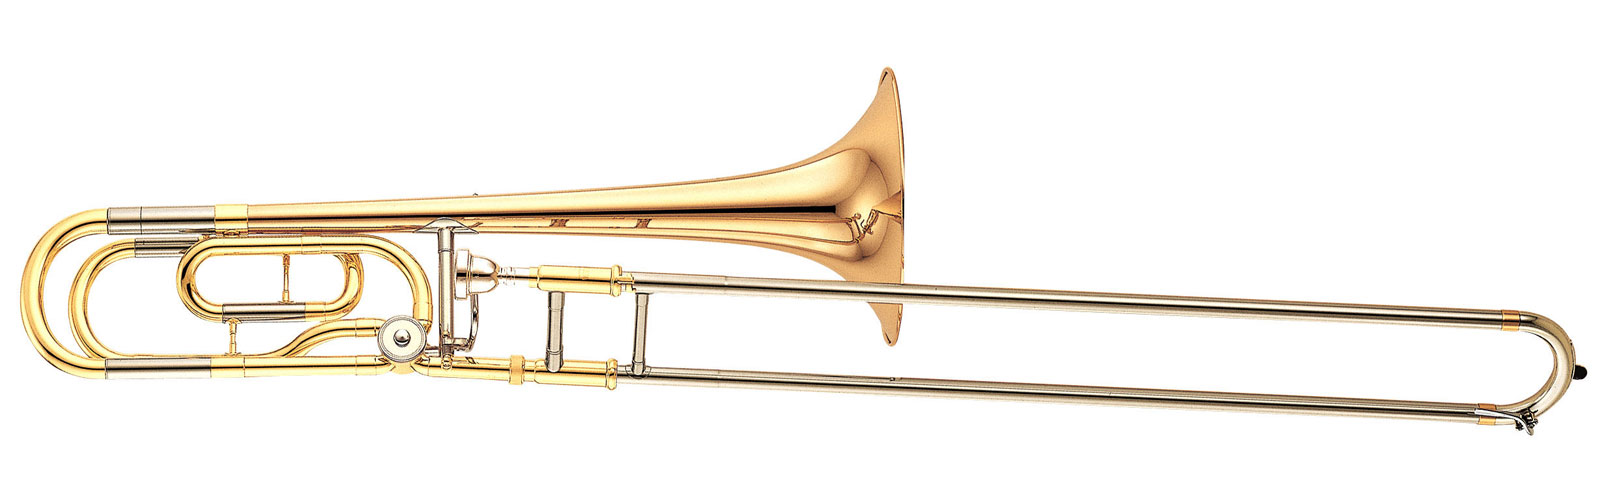 YAMAHA YSL446GE GOLD LACQUER